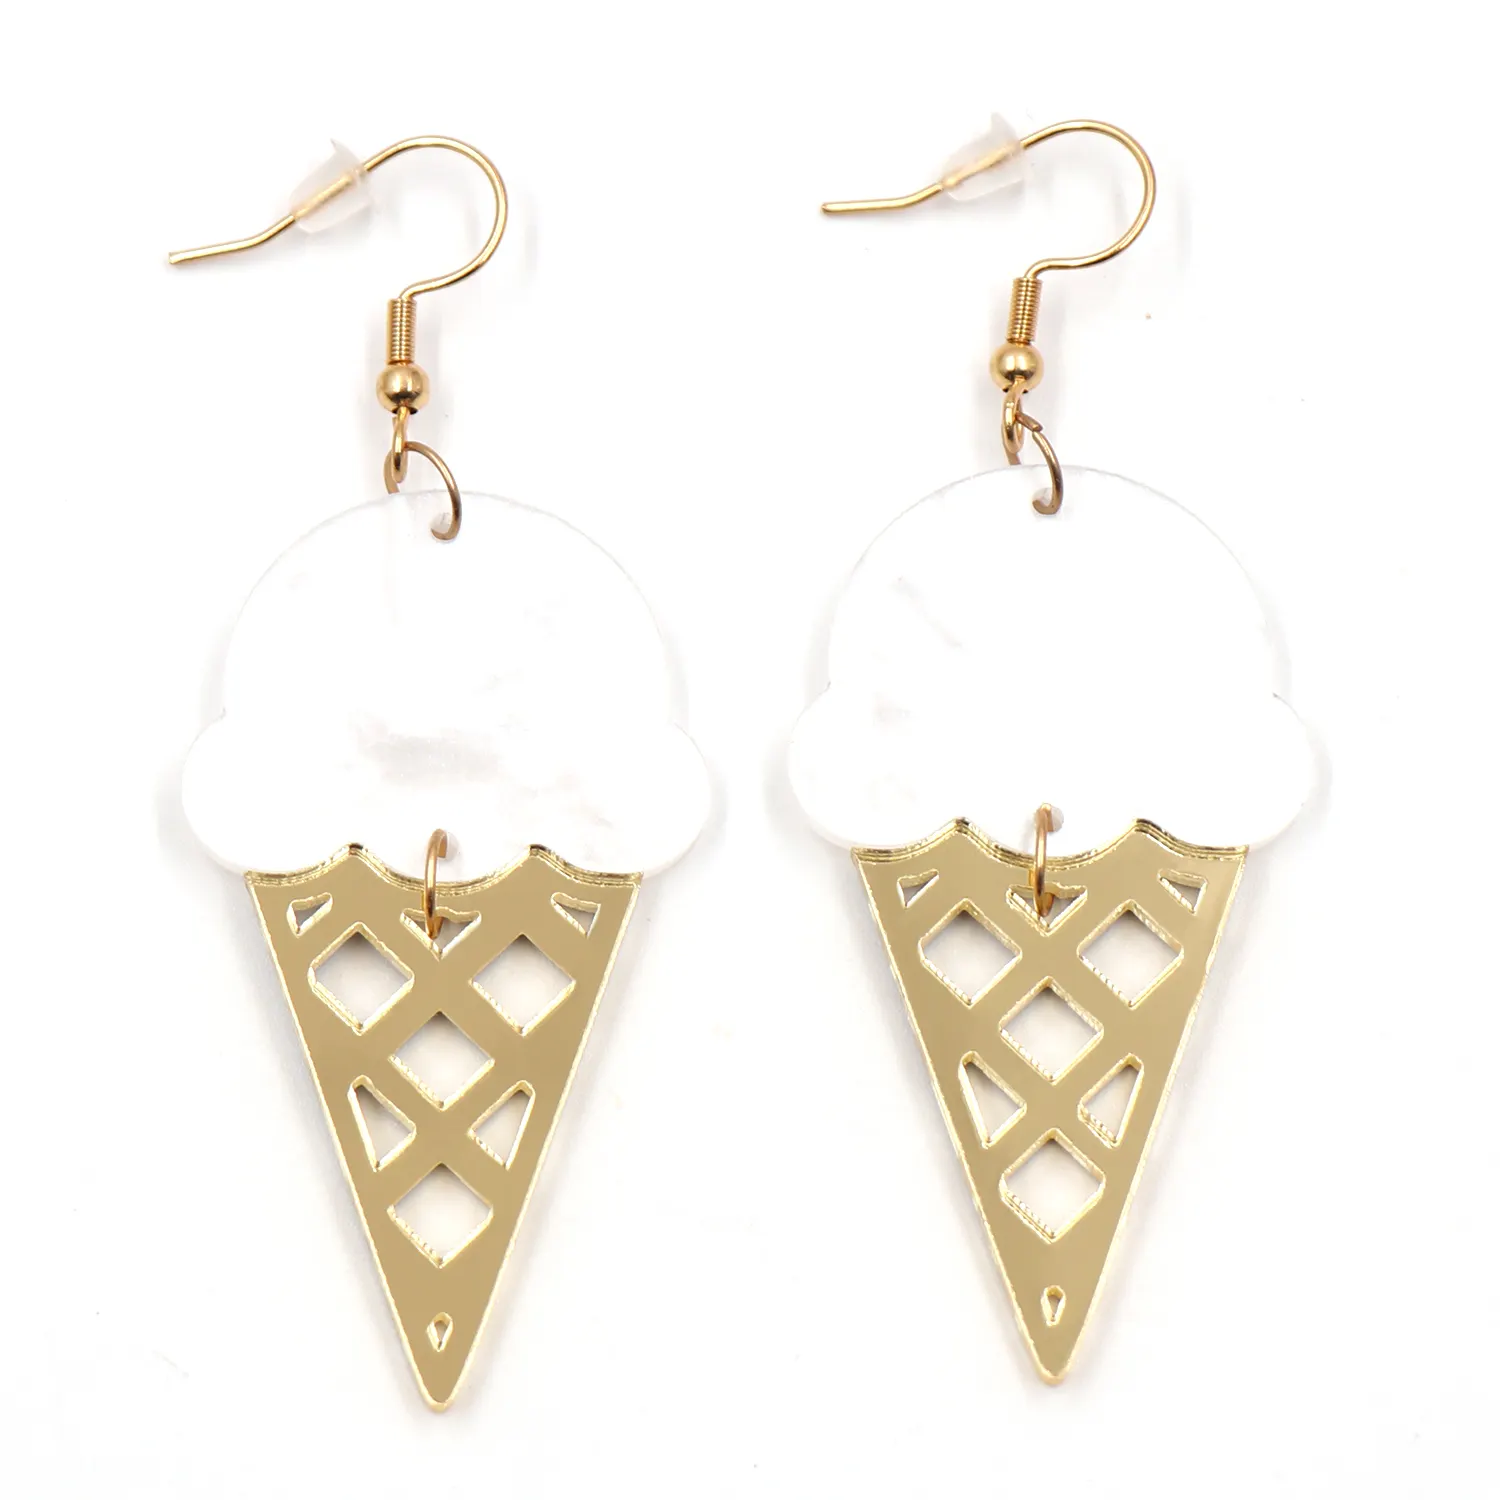 ERS783ER1679 1 pair New product CN Drop Ice Cream TRENDY Acrylic earrings Jewelry for women